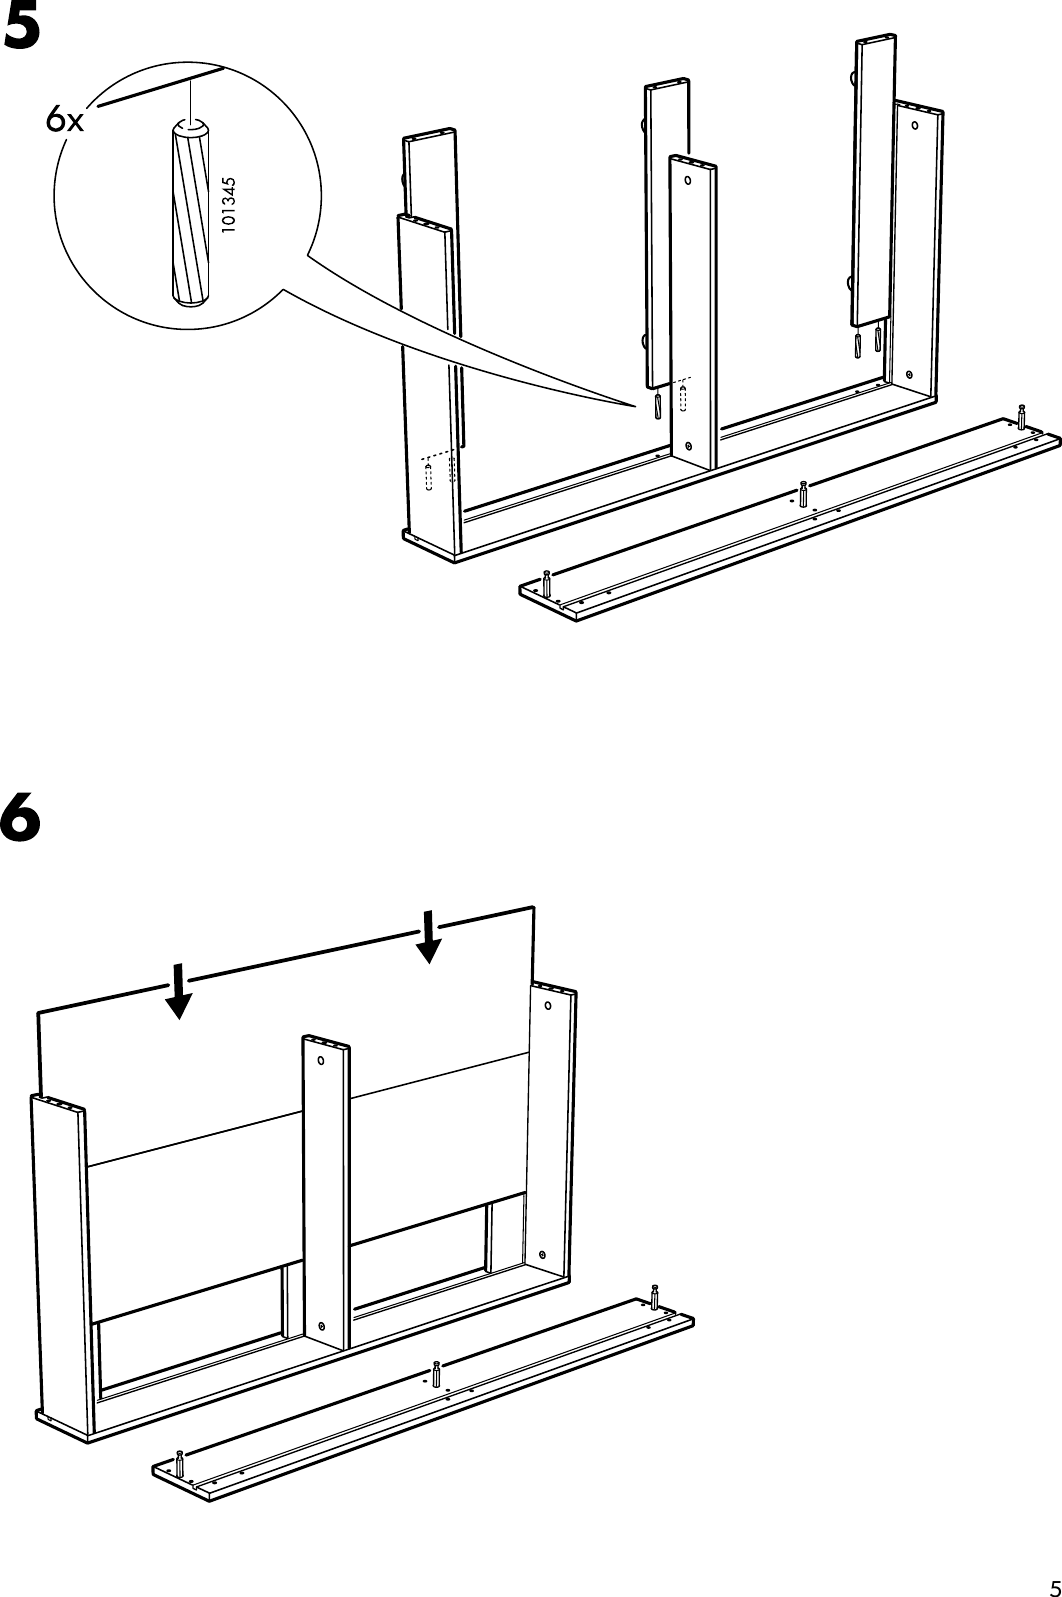 Page 5 of 8 - Ikea Ikea-Engan-Bed-Storage-Box-Assembly-Instruction